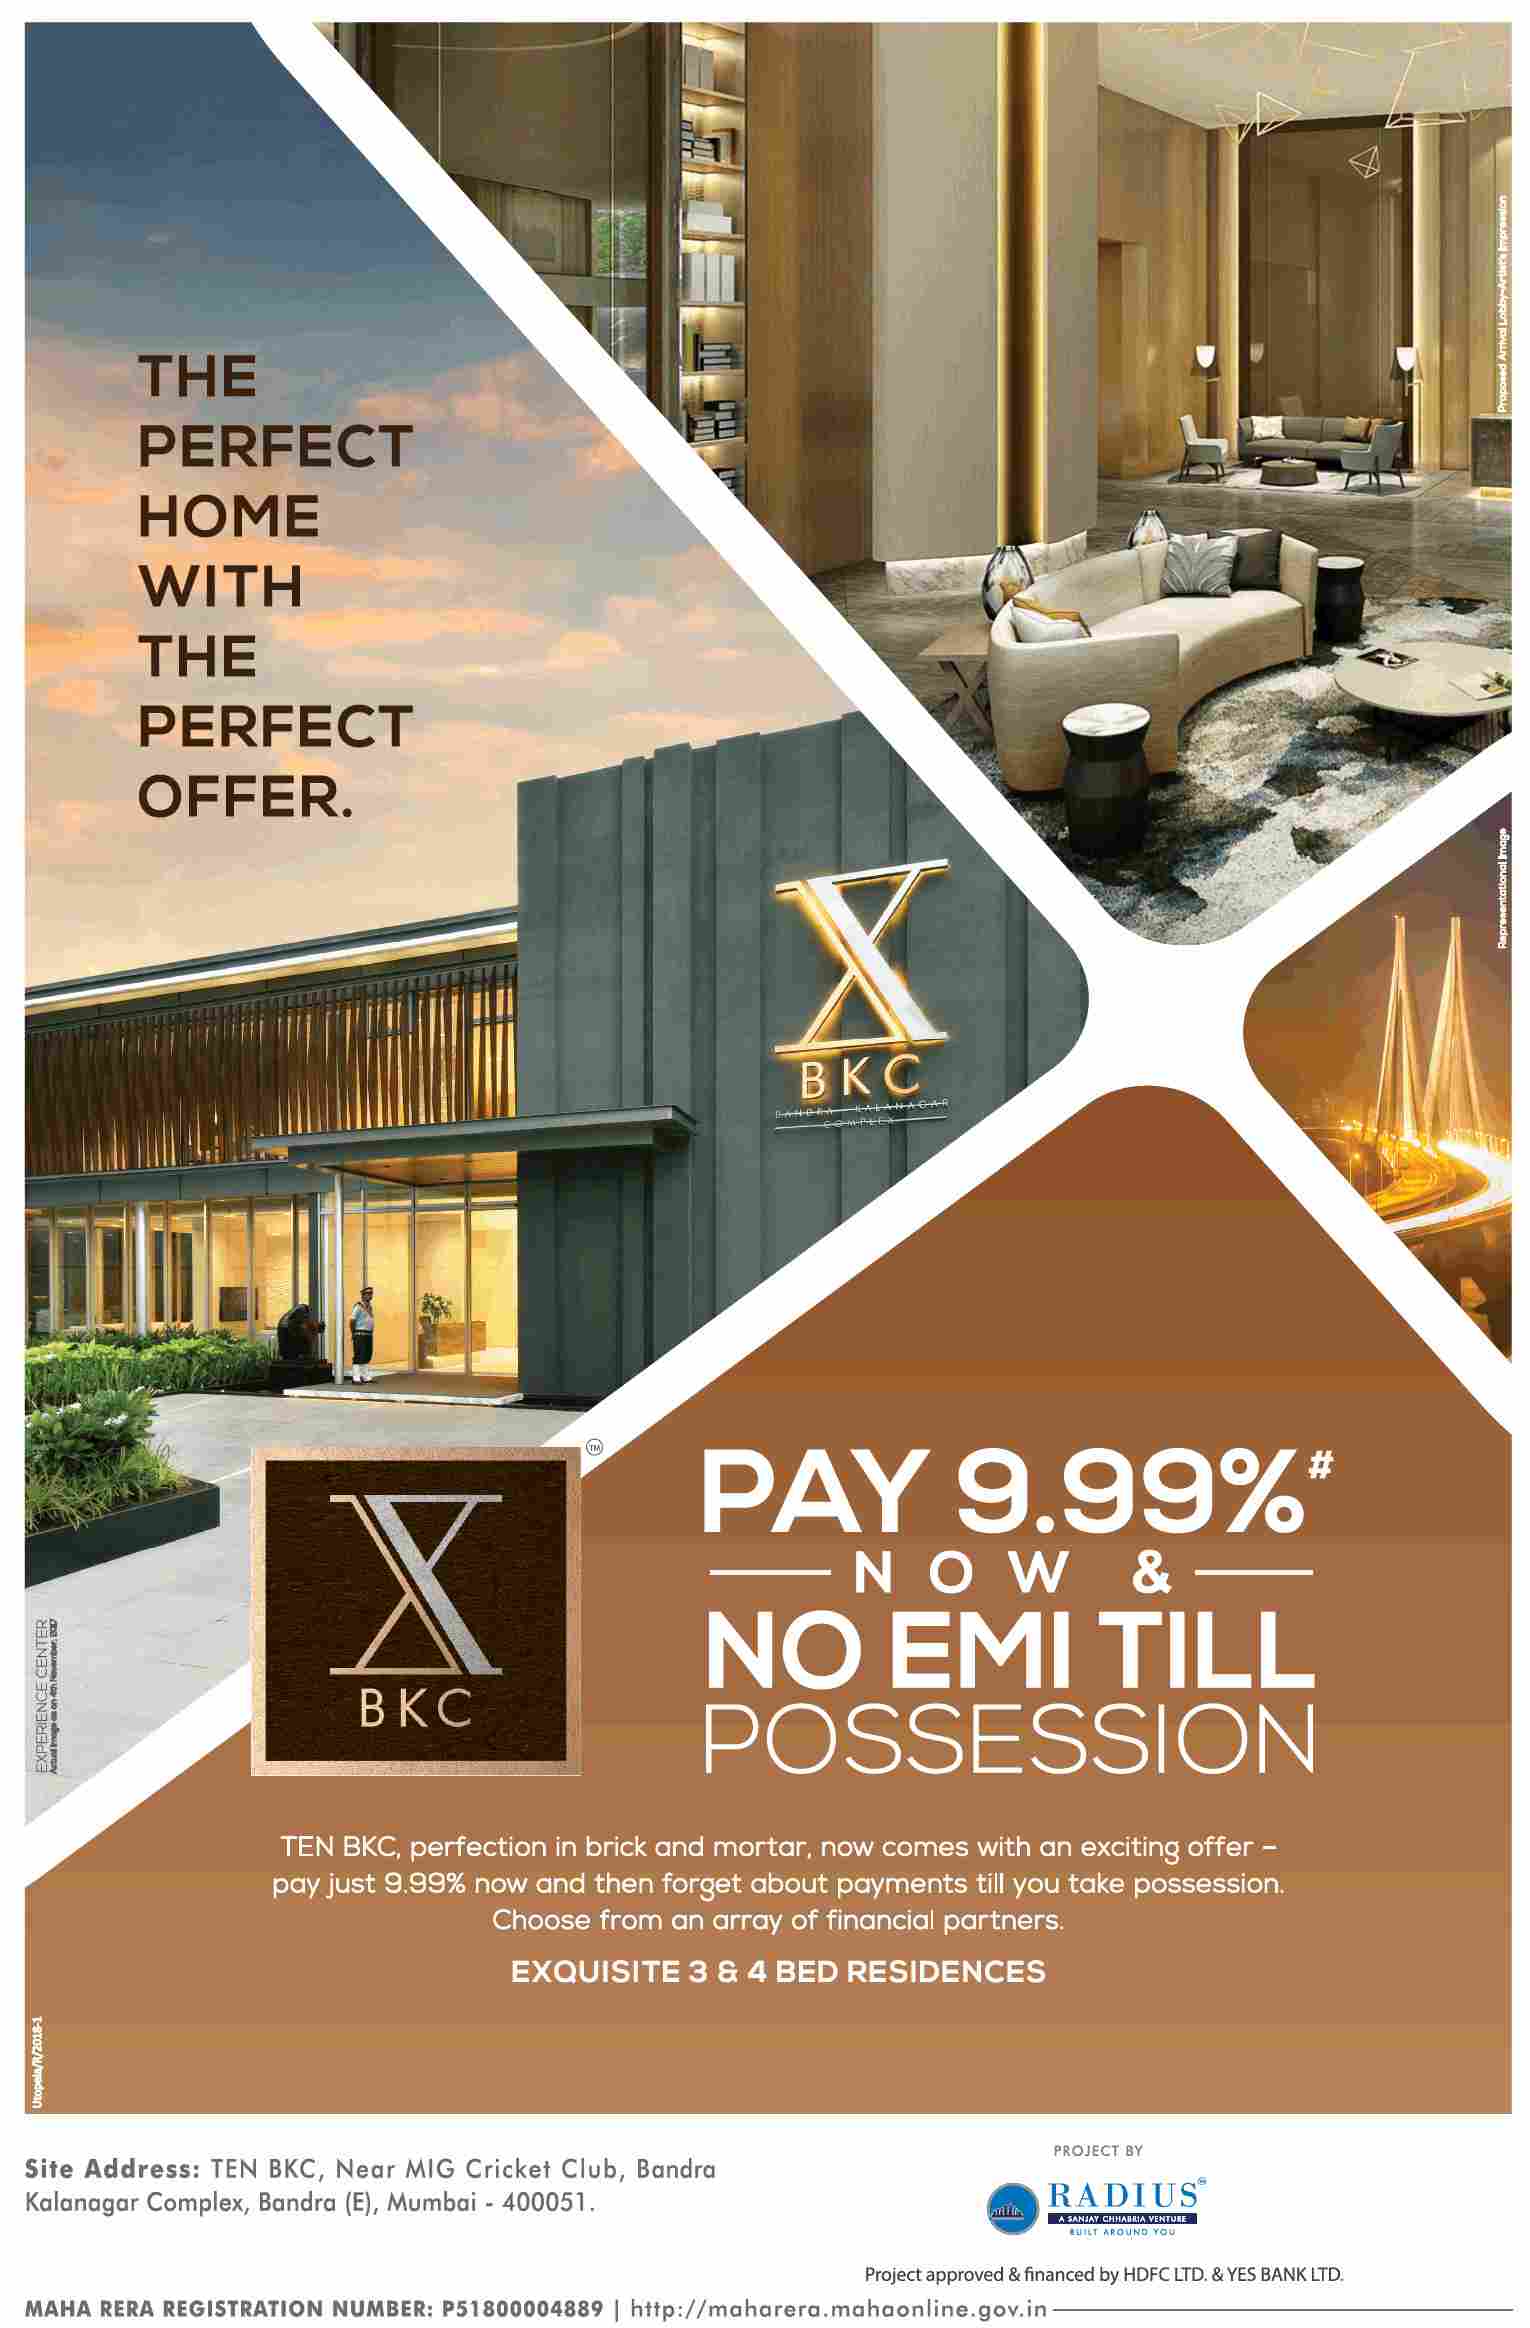 Pay 9.99% now and no EMI till possession at Radius Ten BKC in Mumbai